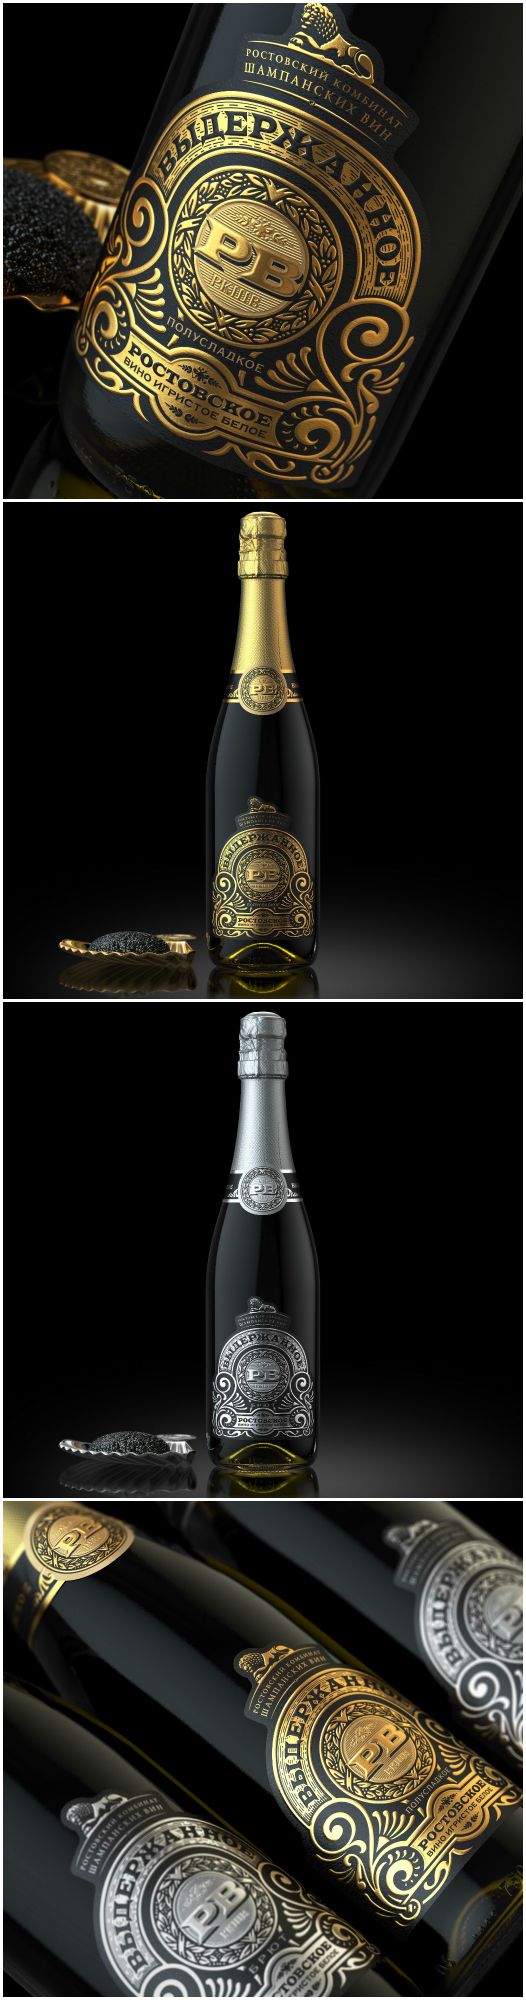 Label Design for a Limited Series of Russian Sparkling Wine Design Agency: Serge...